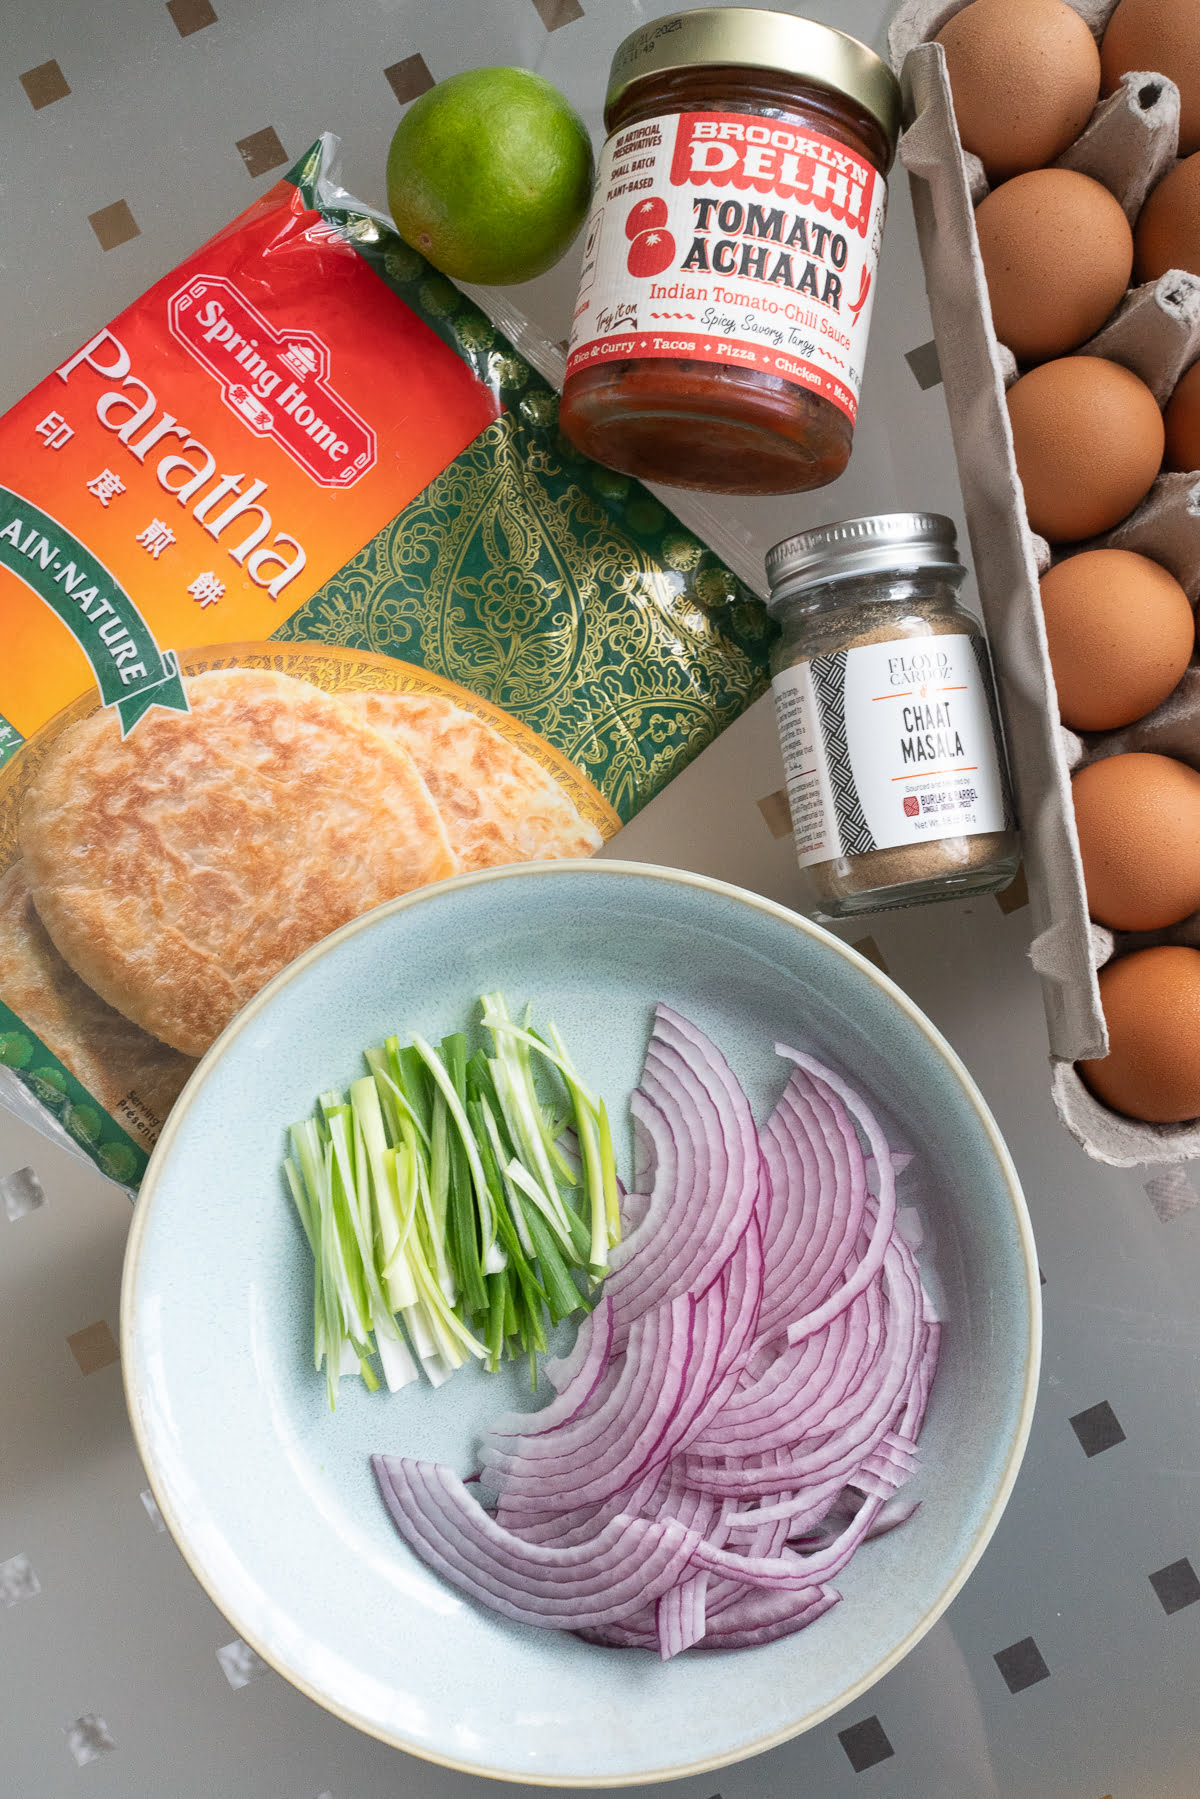 Ingredients for kathi roll on a table (paratha or roti, red onions, green onions, chaat masala, tomato chutney, and eggs).